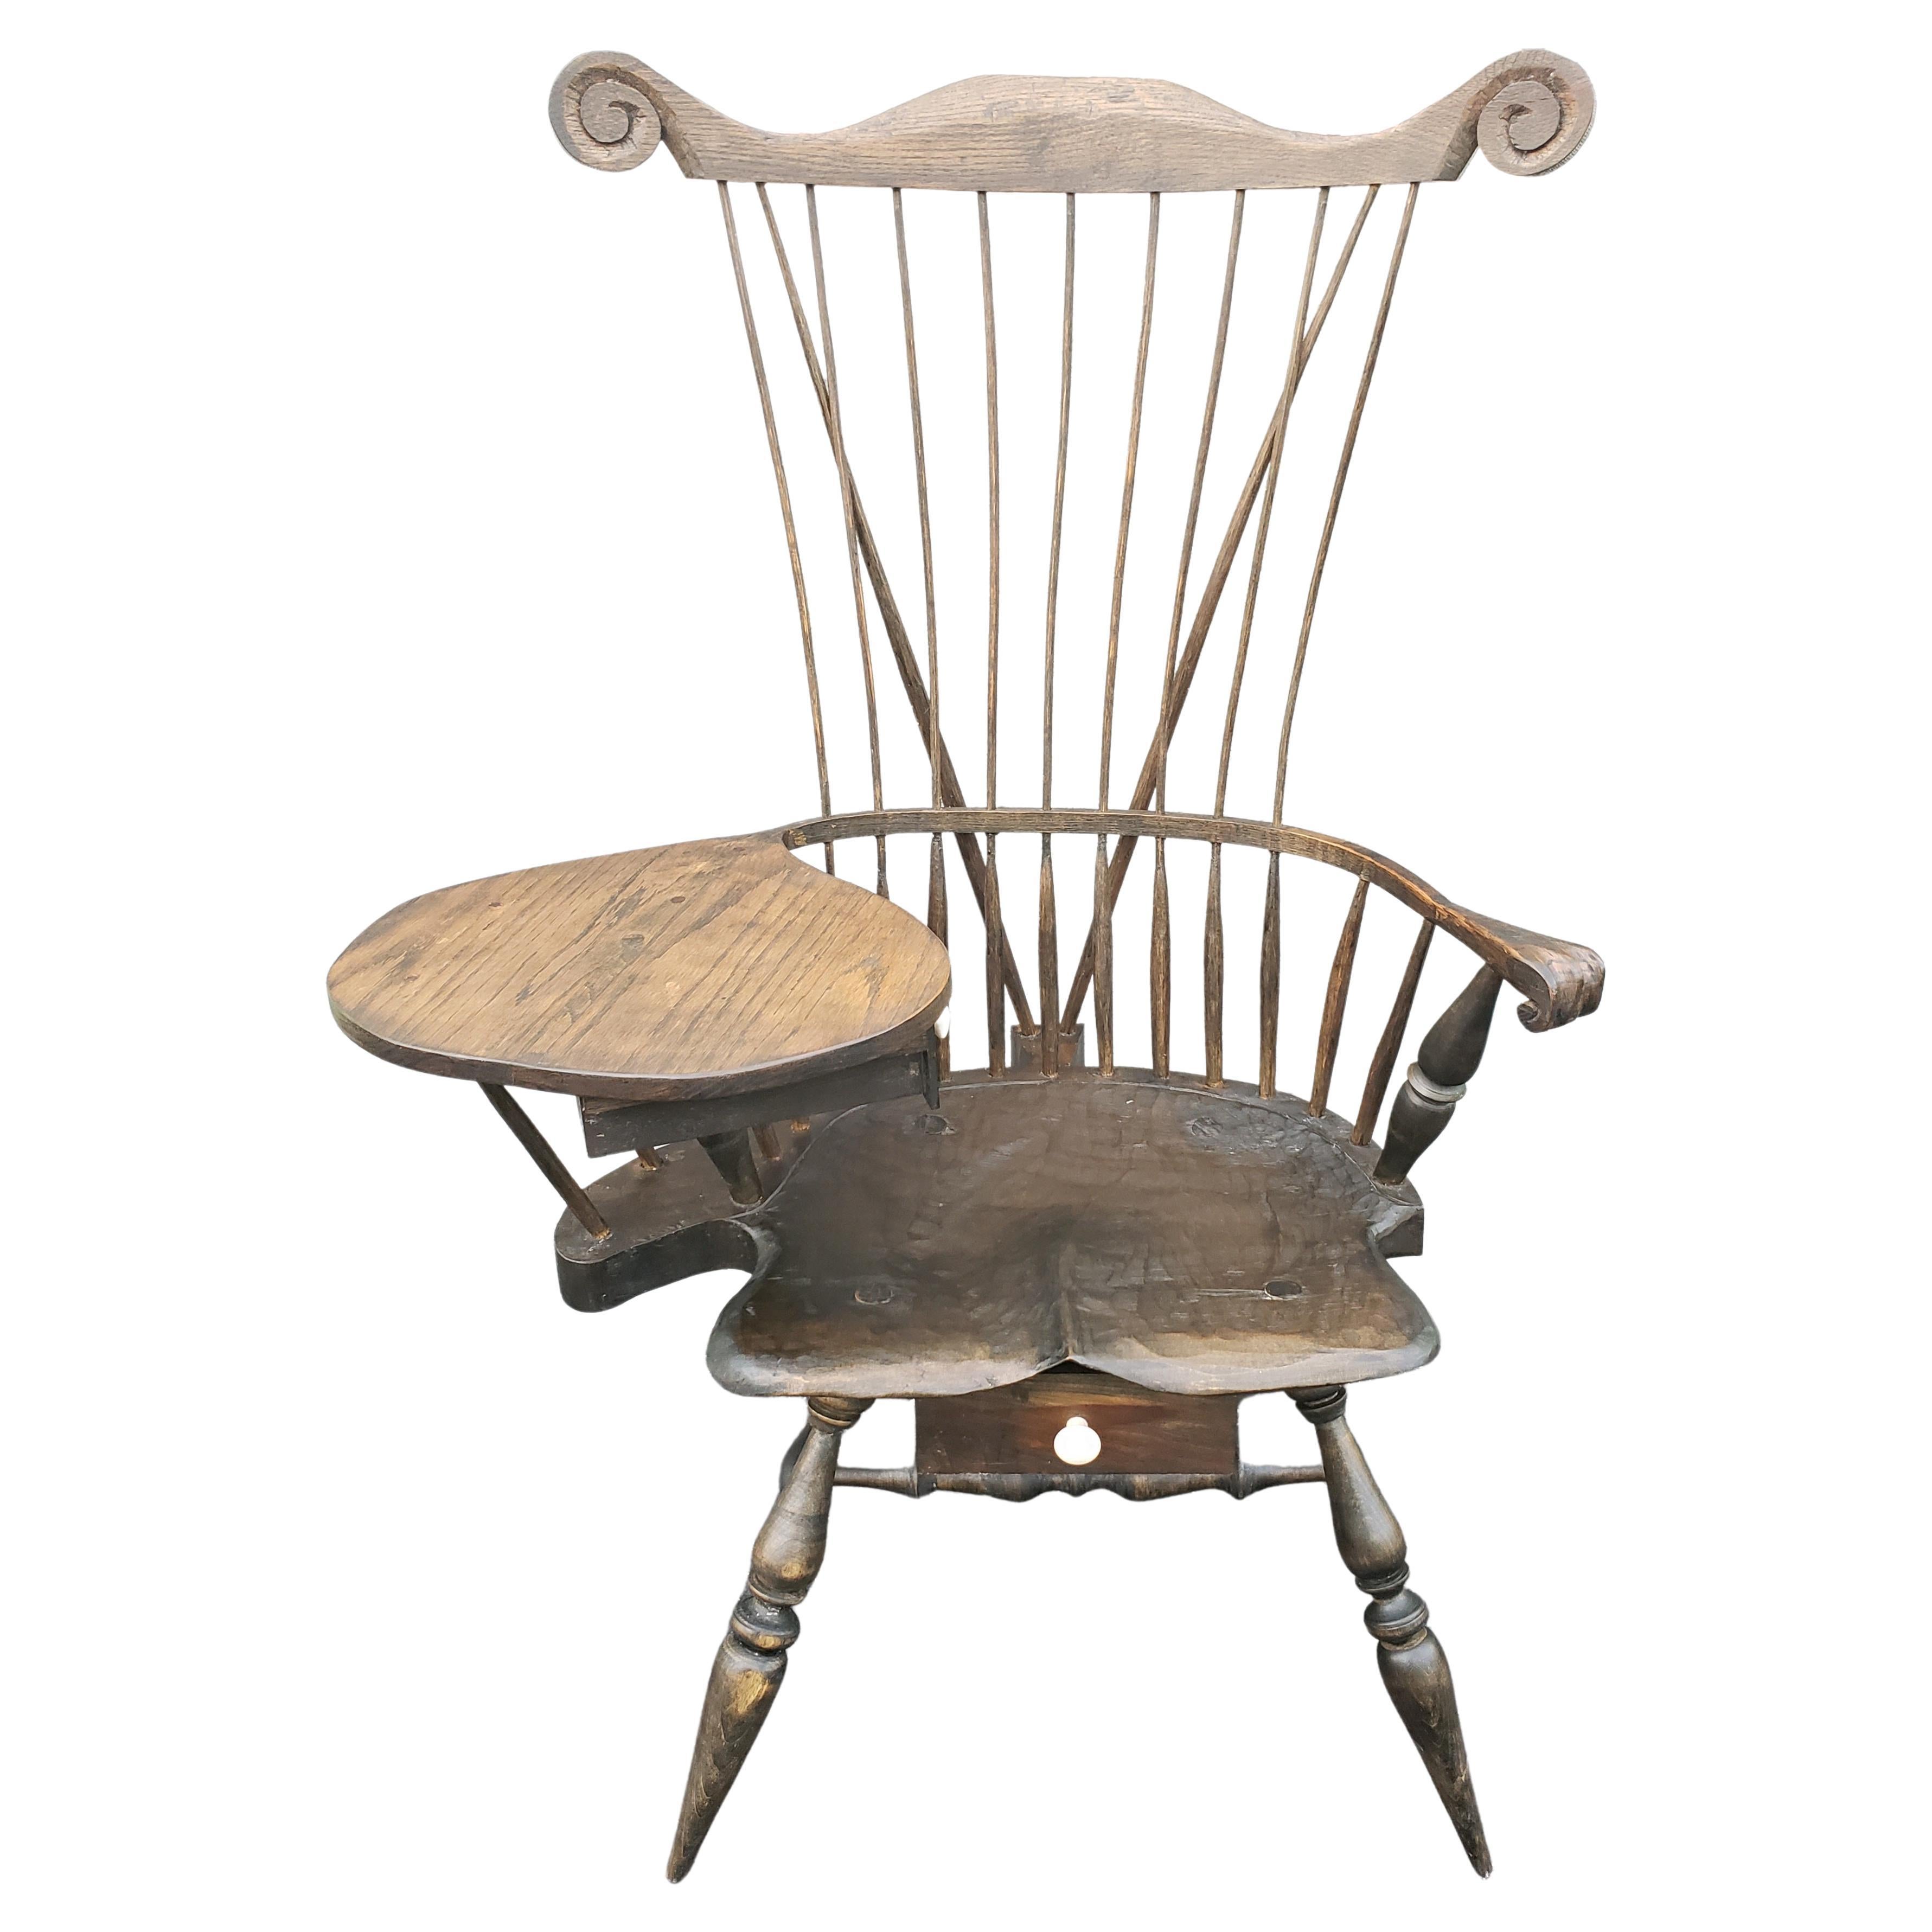 The Comb-Back, spindle and brace back Windsor Writing chair / Desk features a traditional sack-back style Windsor with a comb. It includes a hand sculpted saddle seat , with arms made of a single, steam-bent piece of wood. This particular piece uses